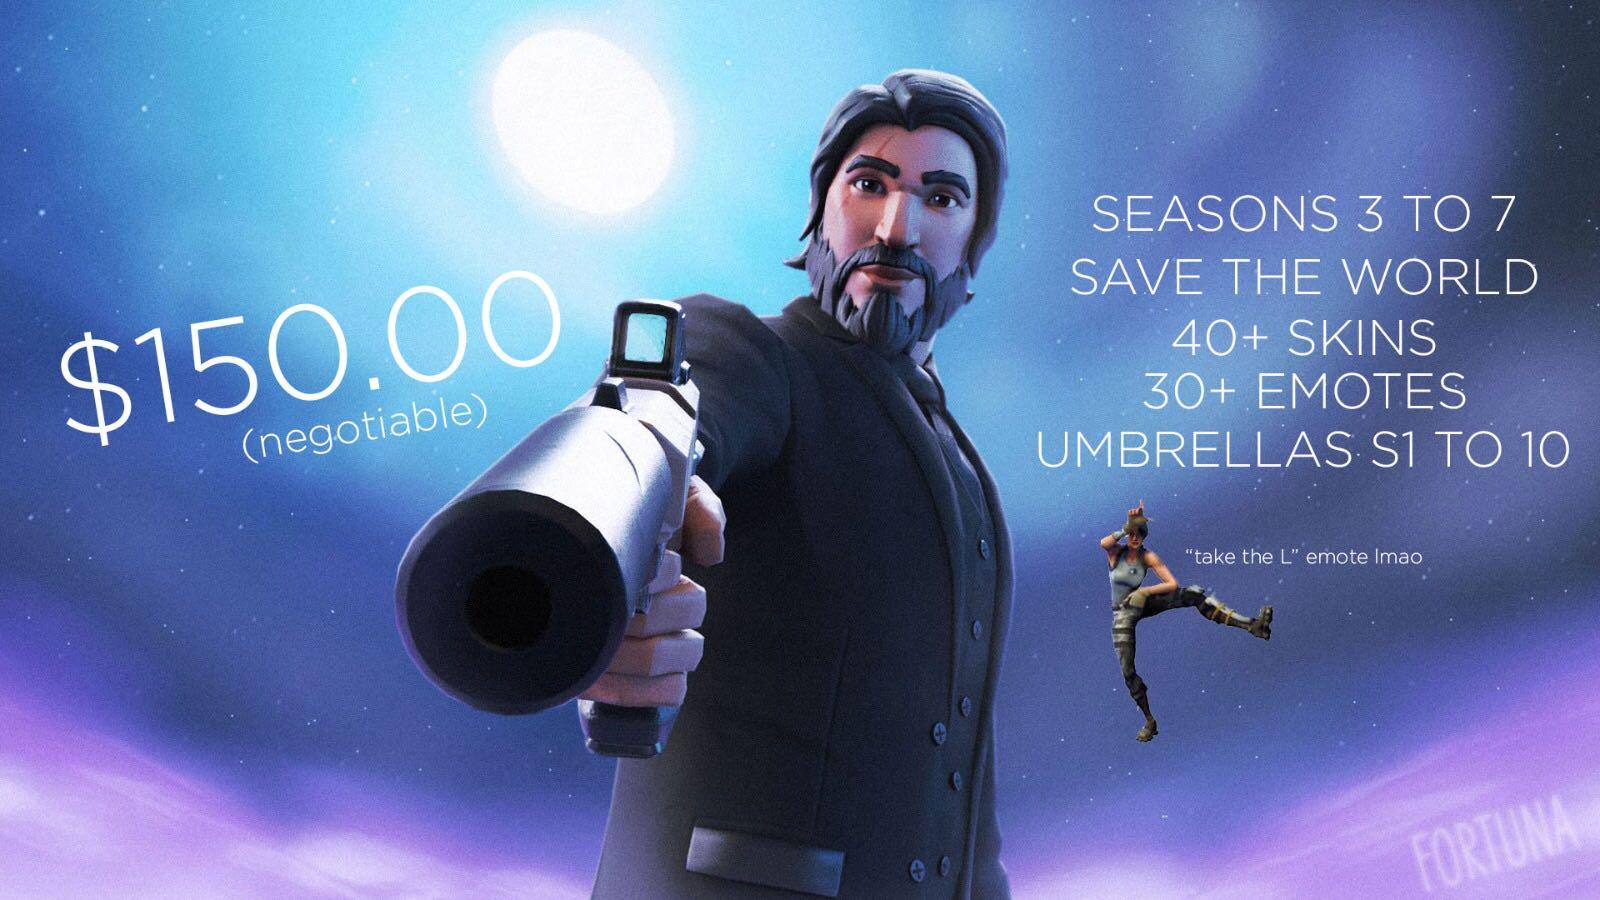 Fortnite Account John Wick Save The World Seasons 3 7 Toys Games Video Gaming In Game Products On Carousell